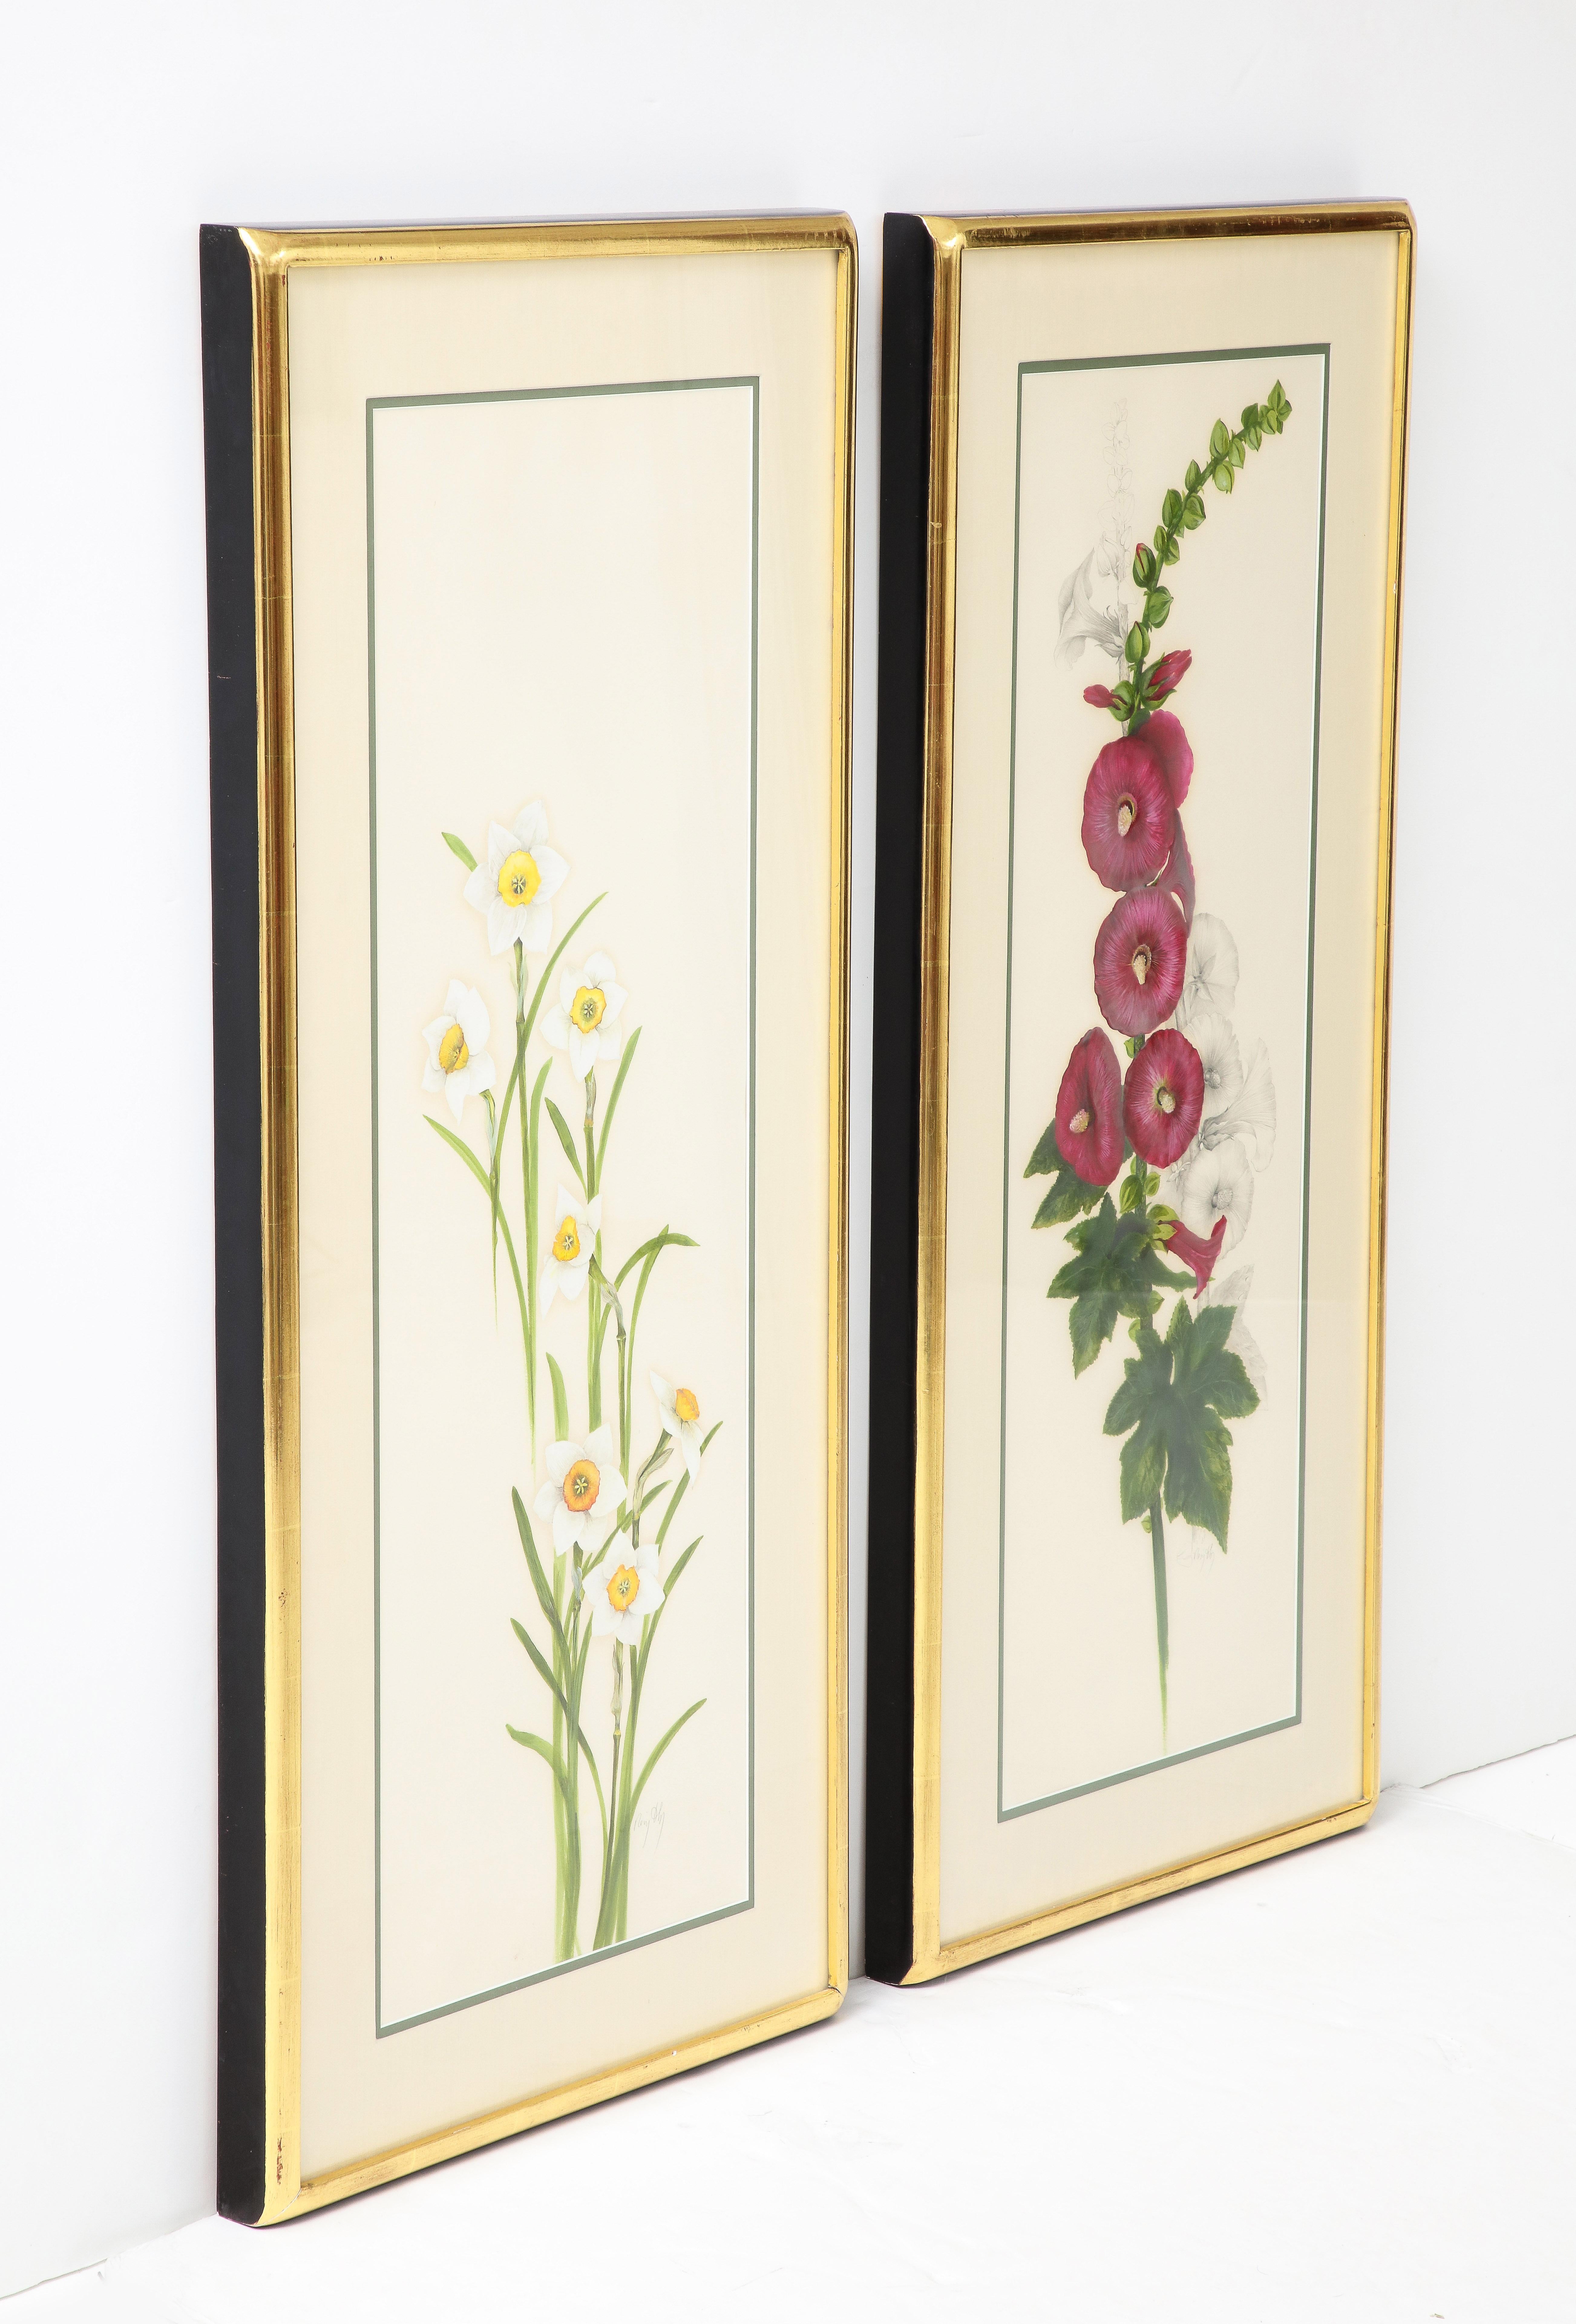 A stunning pair of hand-colored botanicals in an unusual size of narcissus and rose blossoms in beautiful gold frames.